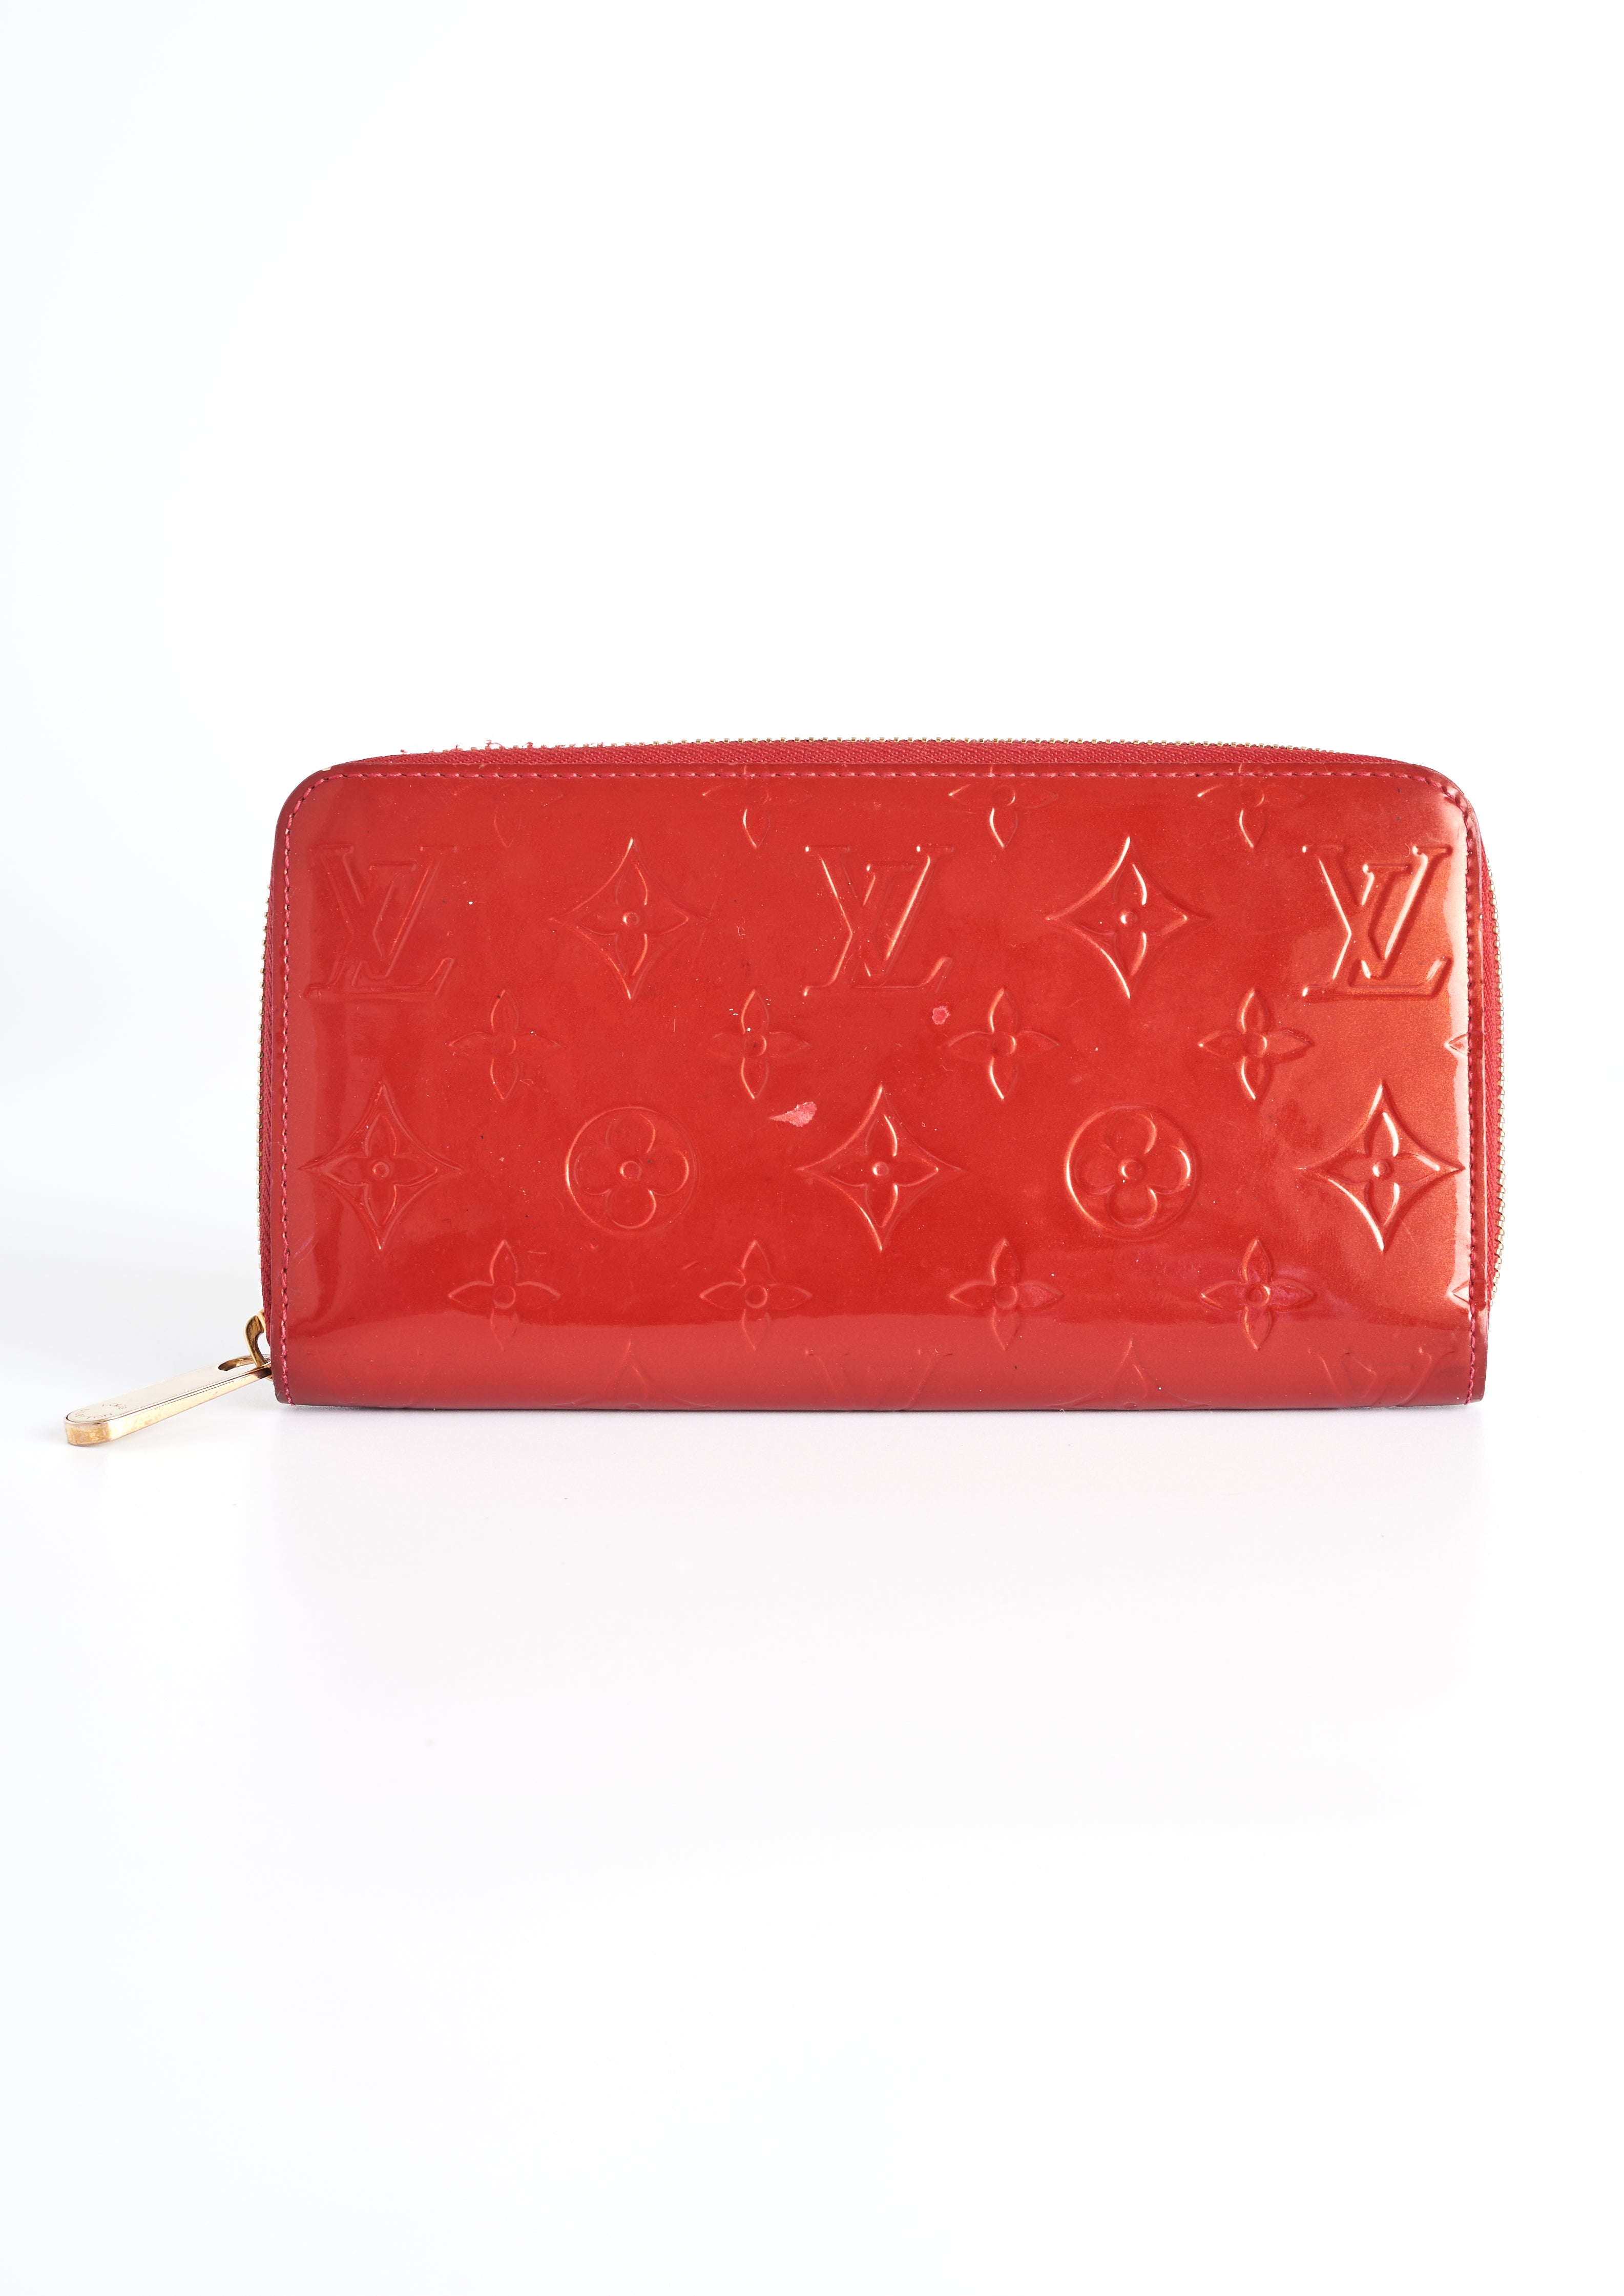 Louis Vuitton Red Patent Leather Wallet for Sale in Rosemead, CA